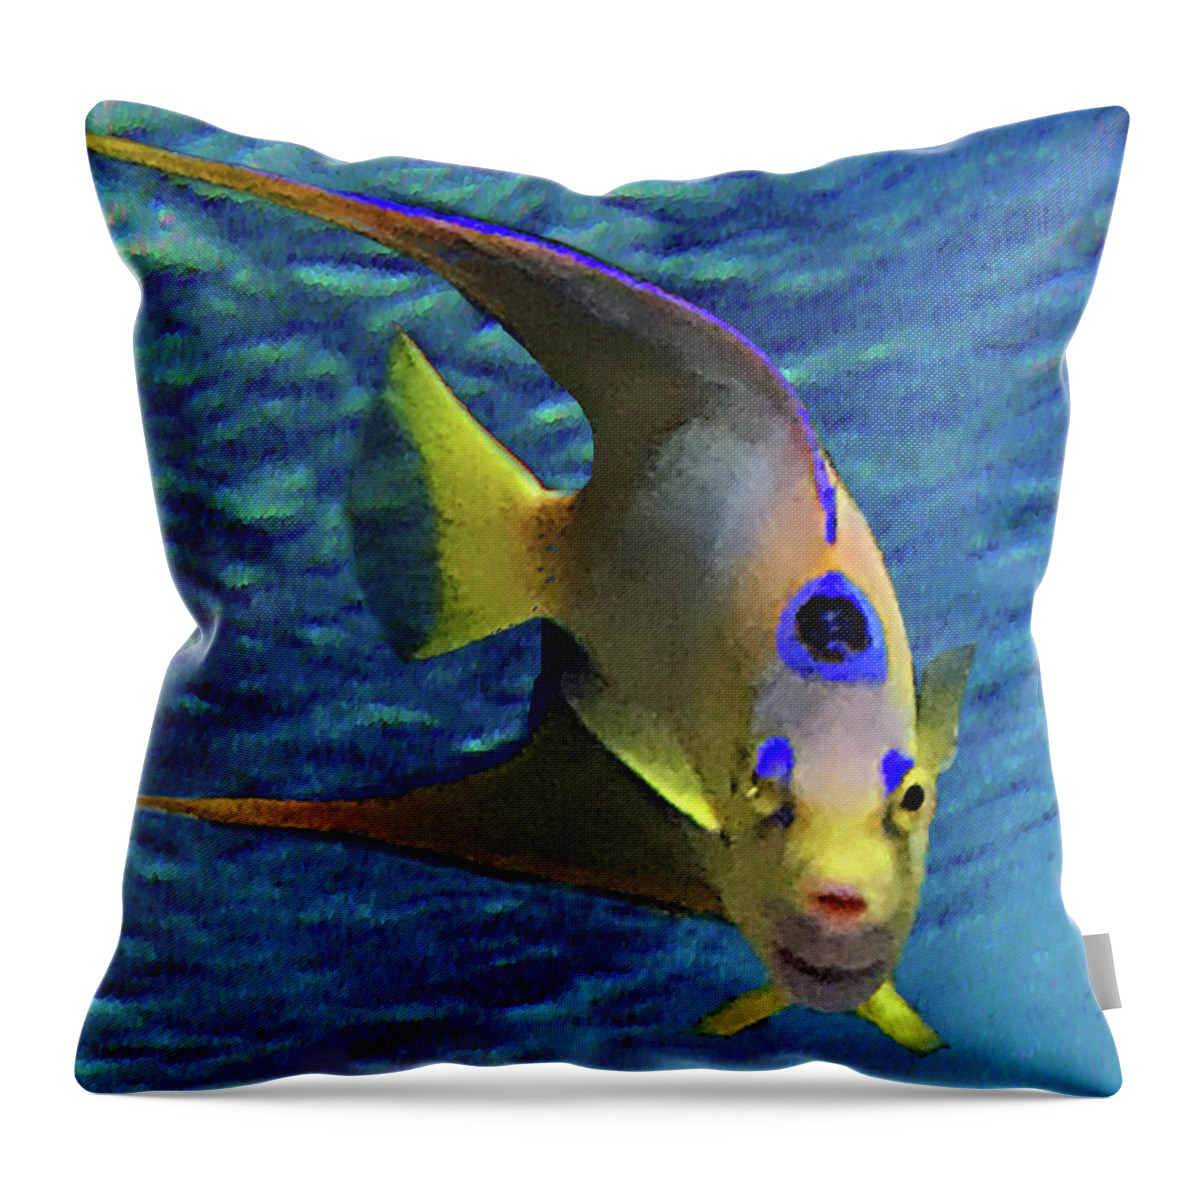 Queen Angel Fish Throw Pillow featuring the mixed media Queen Angel Fish by Steve Karol